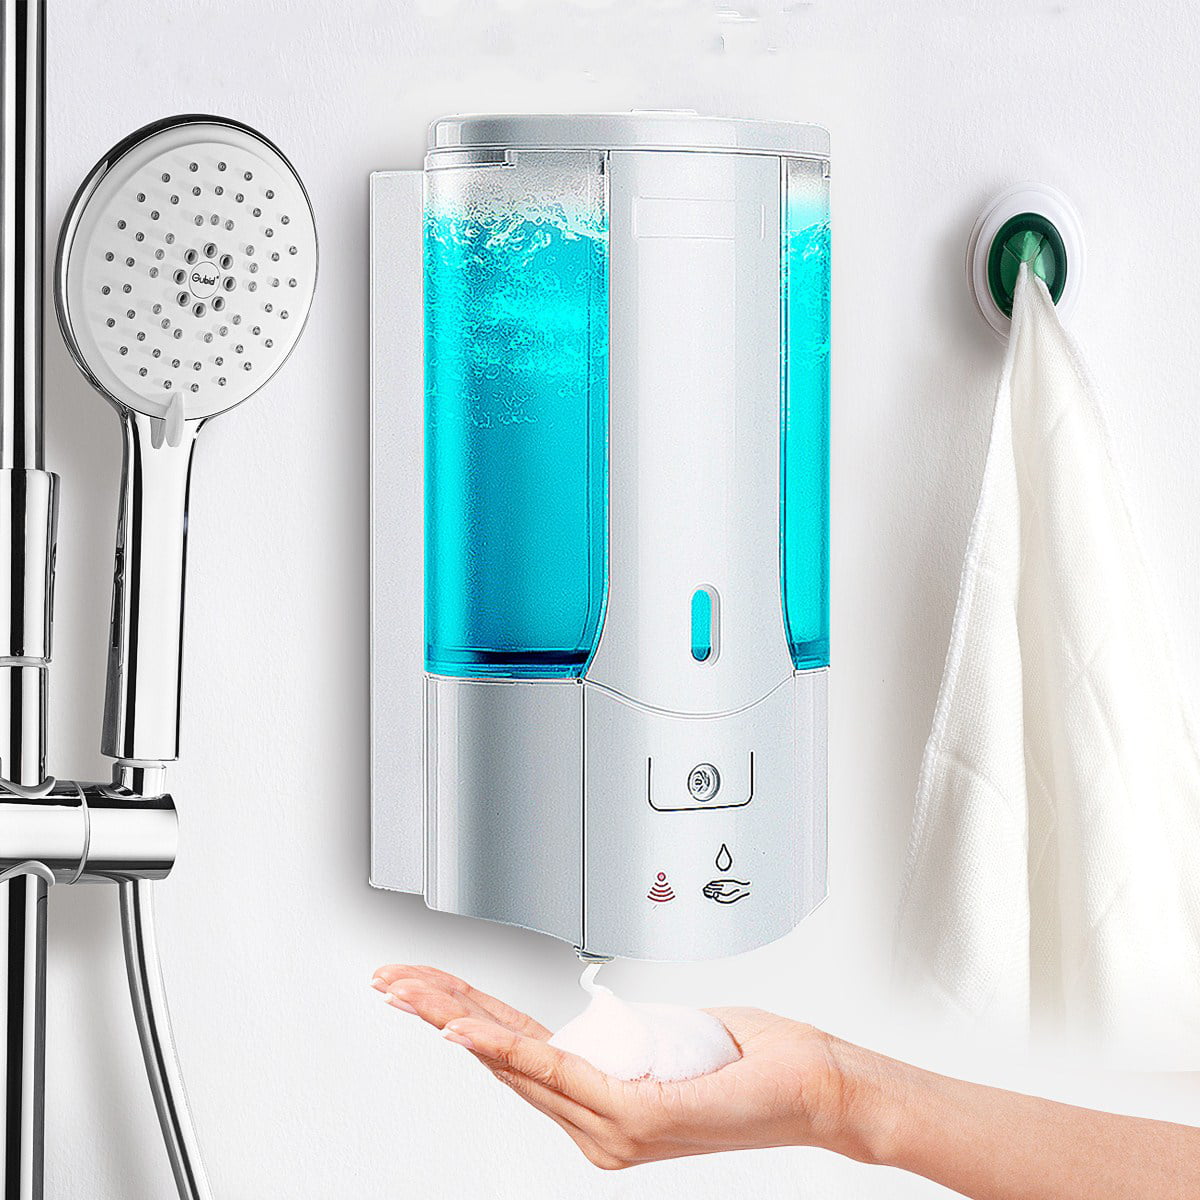 450mL Wall Mounted Automatic Infrared Sensor HandFree Soap Dispenser Bathroom for Home Office